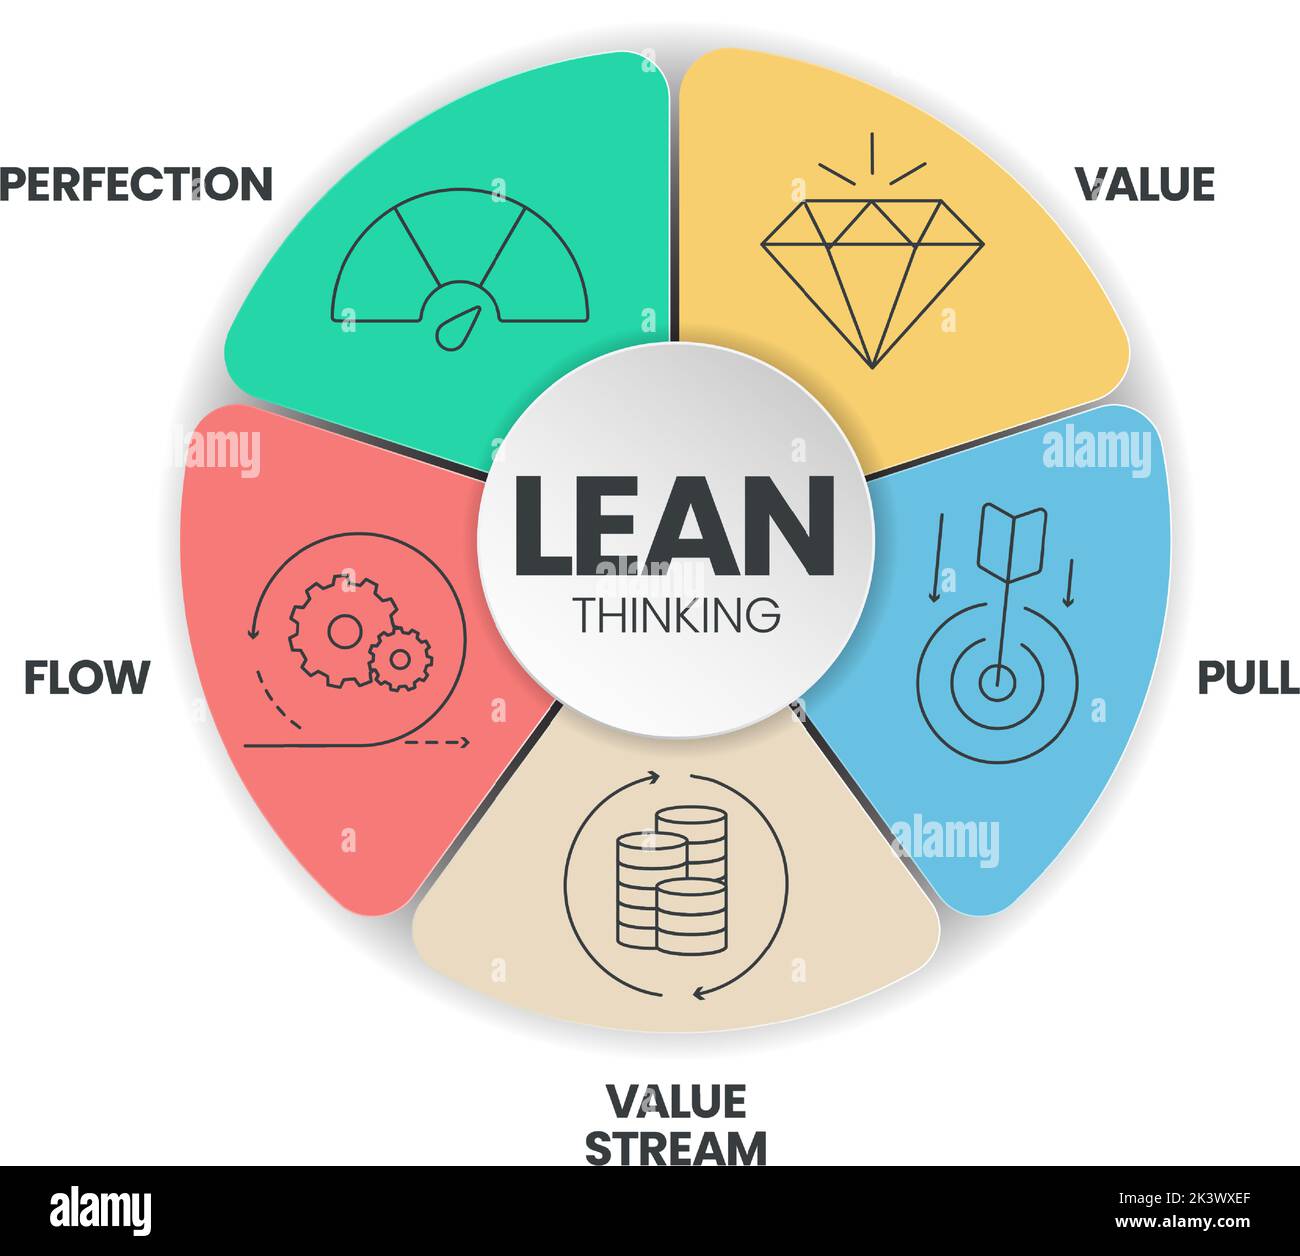 LEAN thinking diagram infographic template with icon has 5 steps to analyse such as Value, Value Stream, Flow, Pull and Perfection. Business and marke Stock Vector